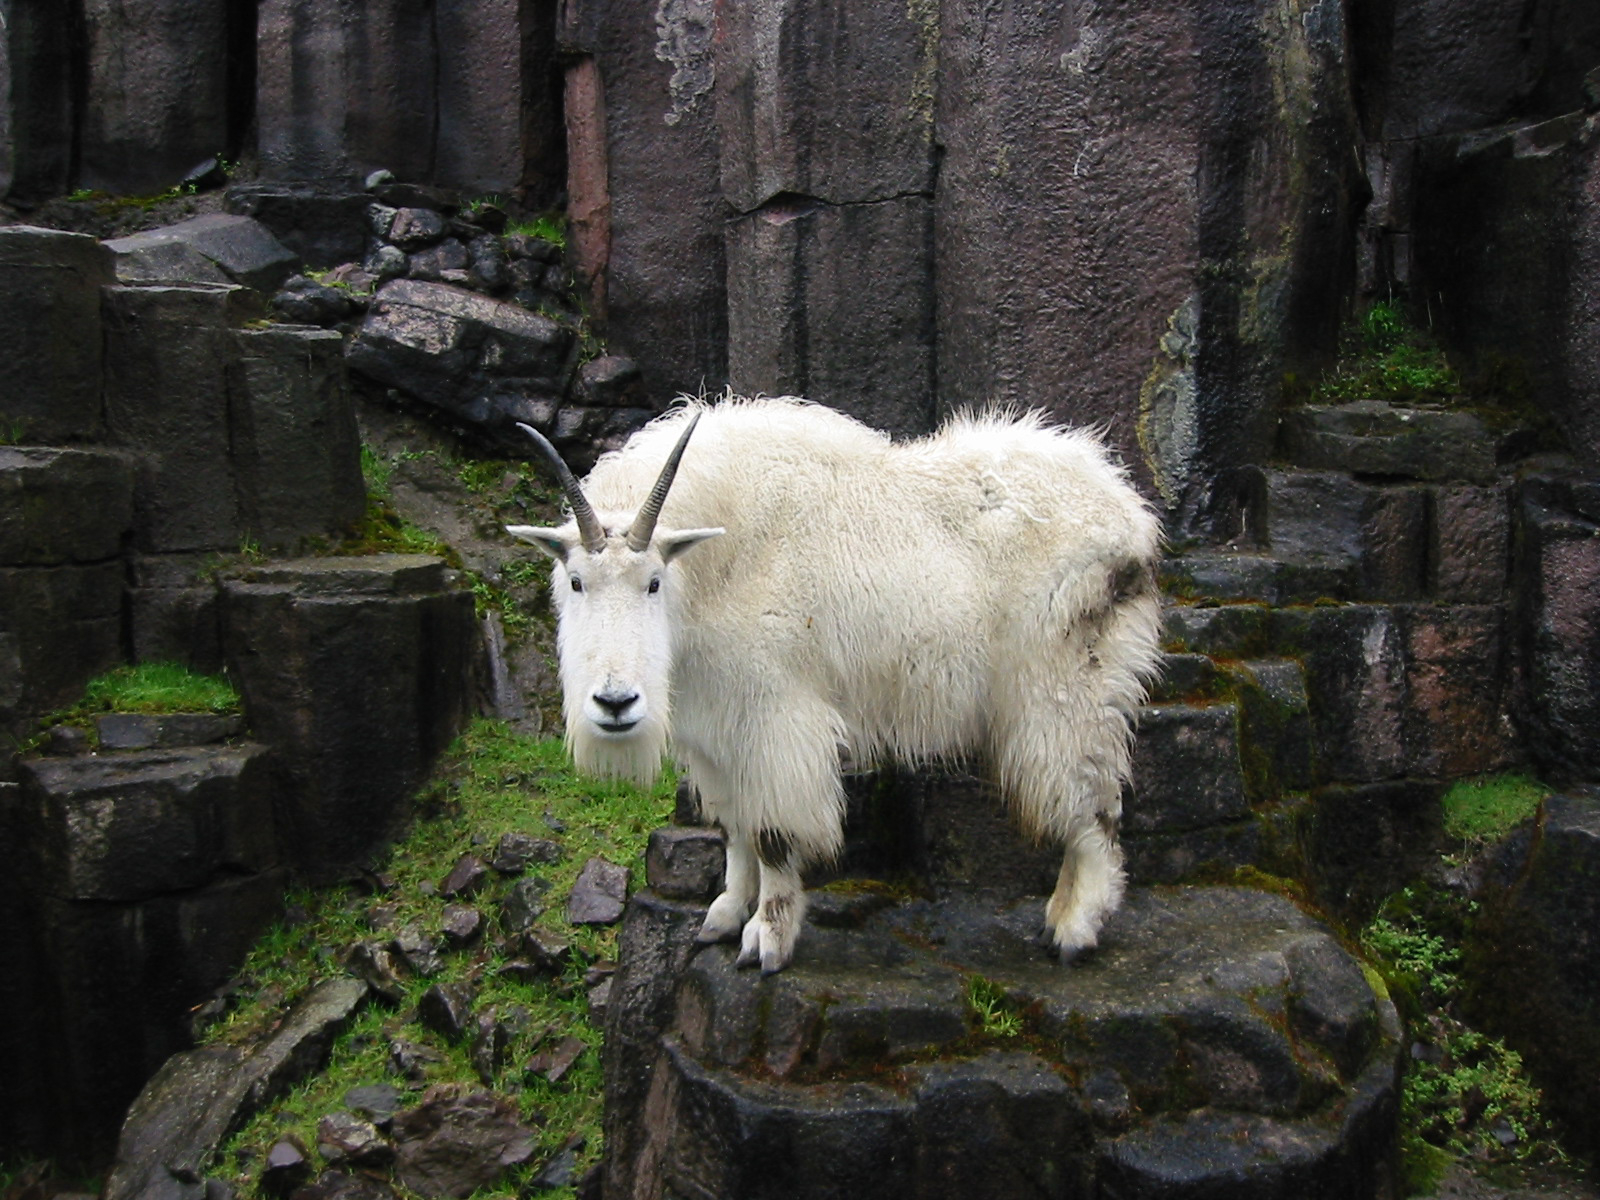 Grover and The Waff: Waffles the Mountain Goat